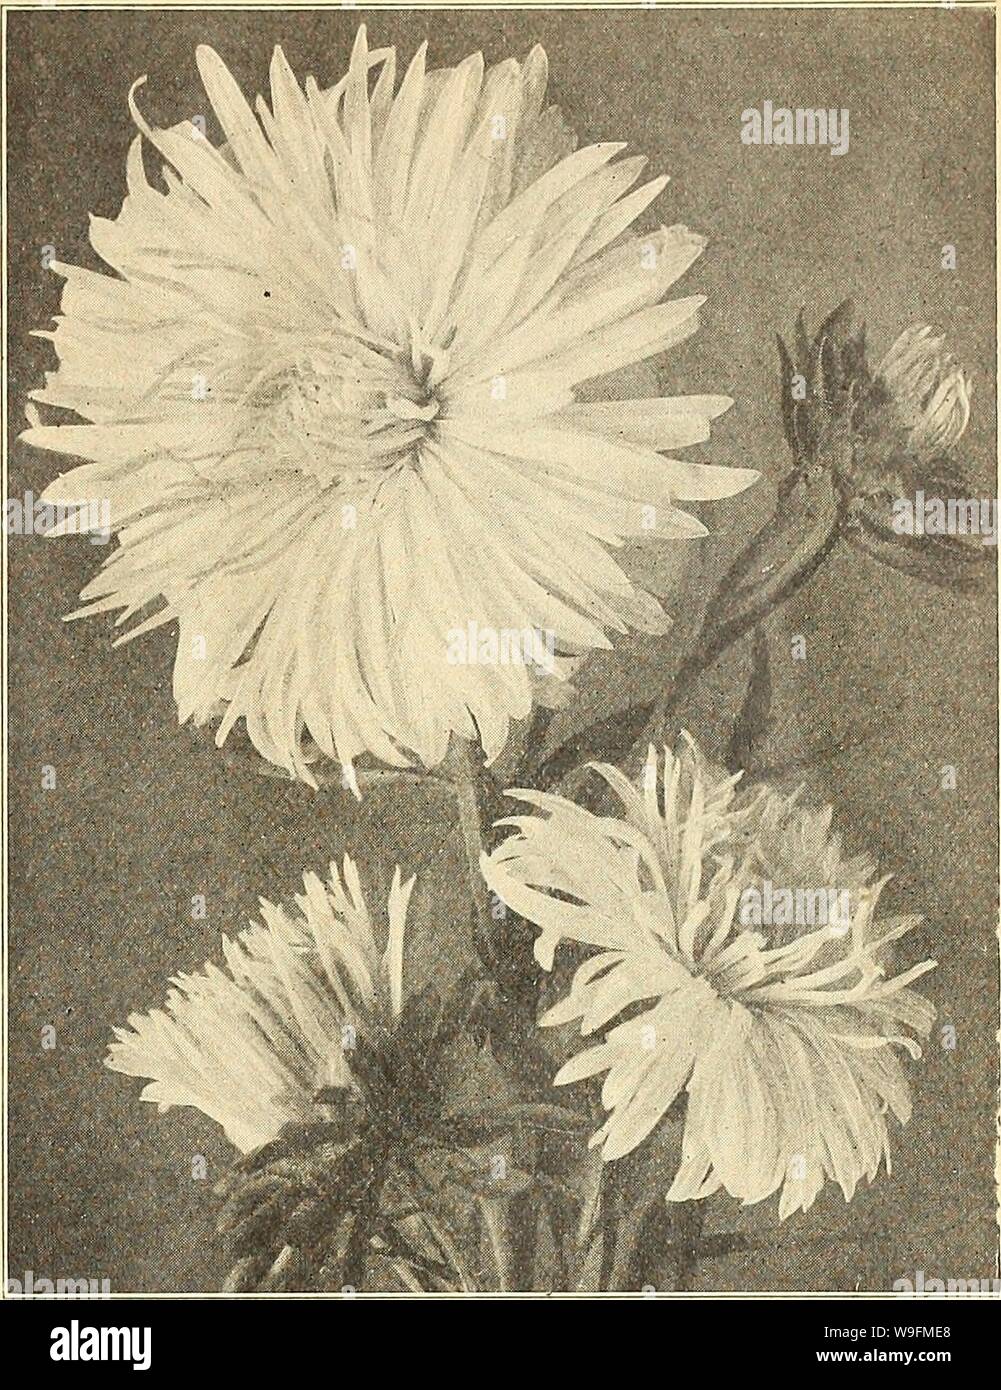 Archive image from page 54 of Currie's farm and garden annual. Currie's farm and garden annual : spring 1919 44th year  curriesfarmgarde19curr 2 Year: 1919 ( LIST OF CHOICE ASTER SEEDS FOR 1919. 49 CURRIE'S CHOICE ASTERS ASTERMUM. Pkt. A splendid new type of the Hohenzollern Aster, of im- mense size, 'with very full center. The plant reaches a height of from IS to 24 inches, growing- very straight, with strong, sturdy stems, starting near the base. We offer it in three colors. White, Pink, Laven- der and Mixed. Each, per pkt 15 One pkt. each color for 35 SEMPLES BRANCHING. A variety flowering Stock Photo